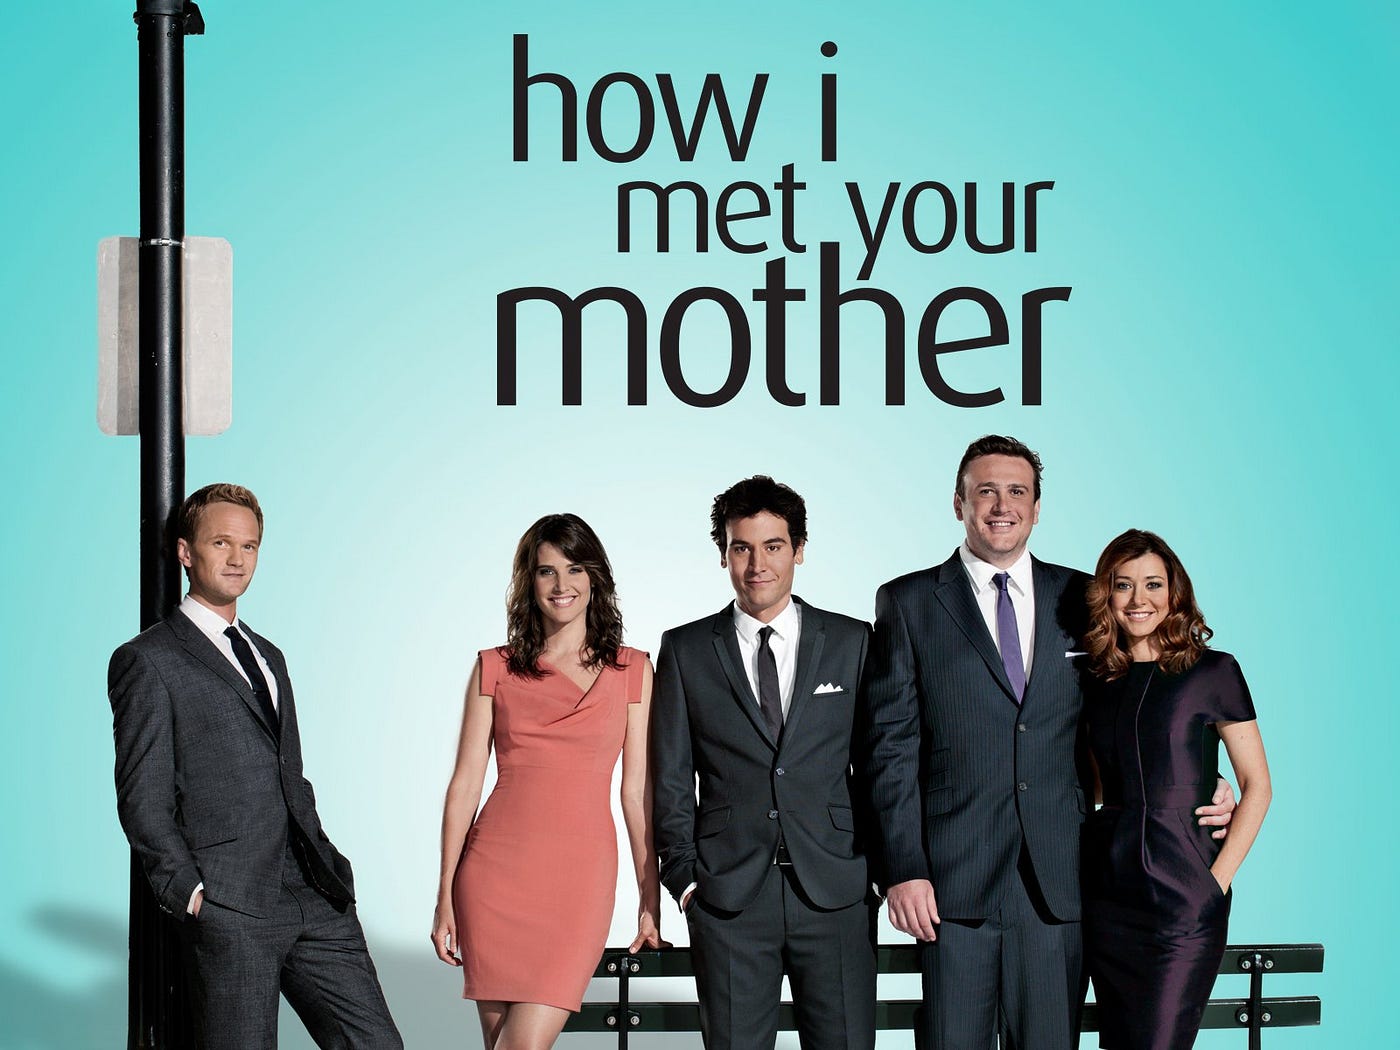 Character Arc Analysis: How I Met Your Mother, by Gregory Cala